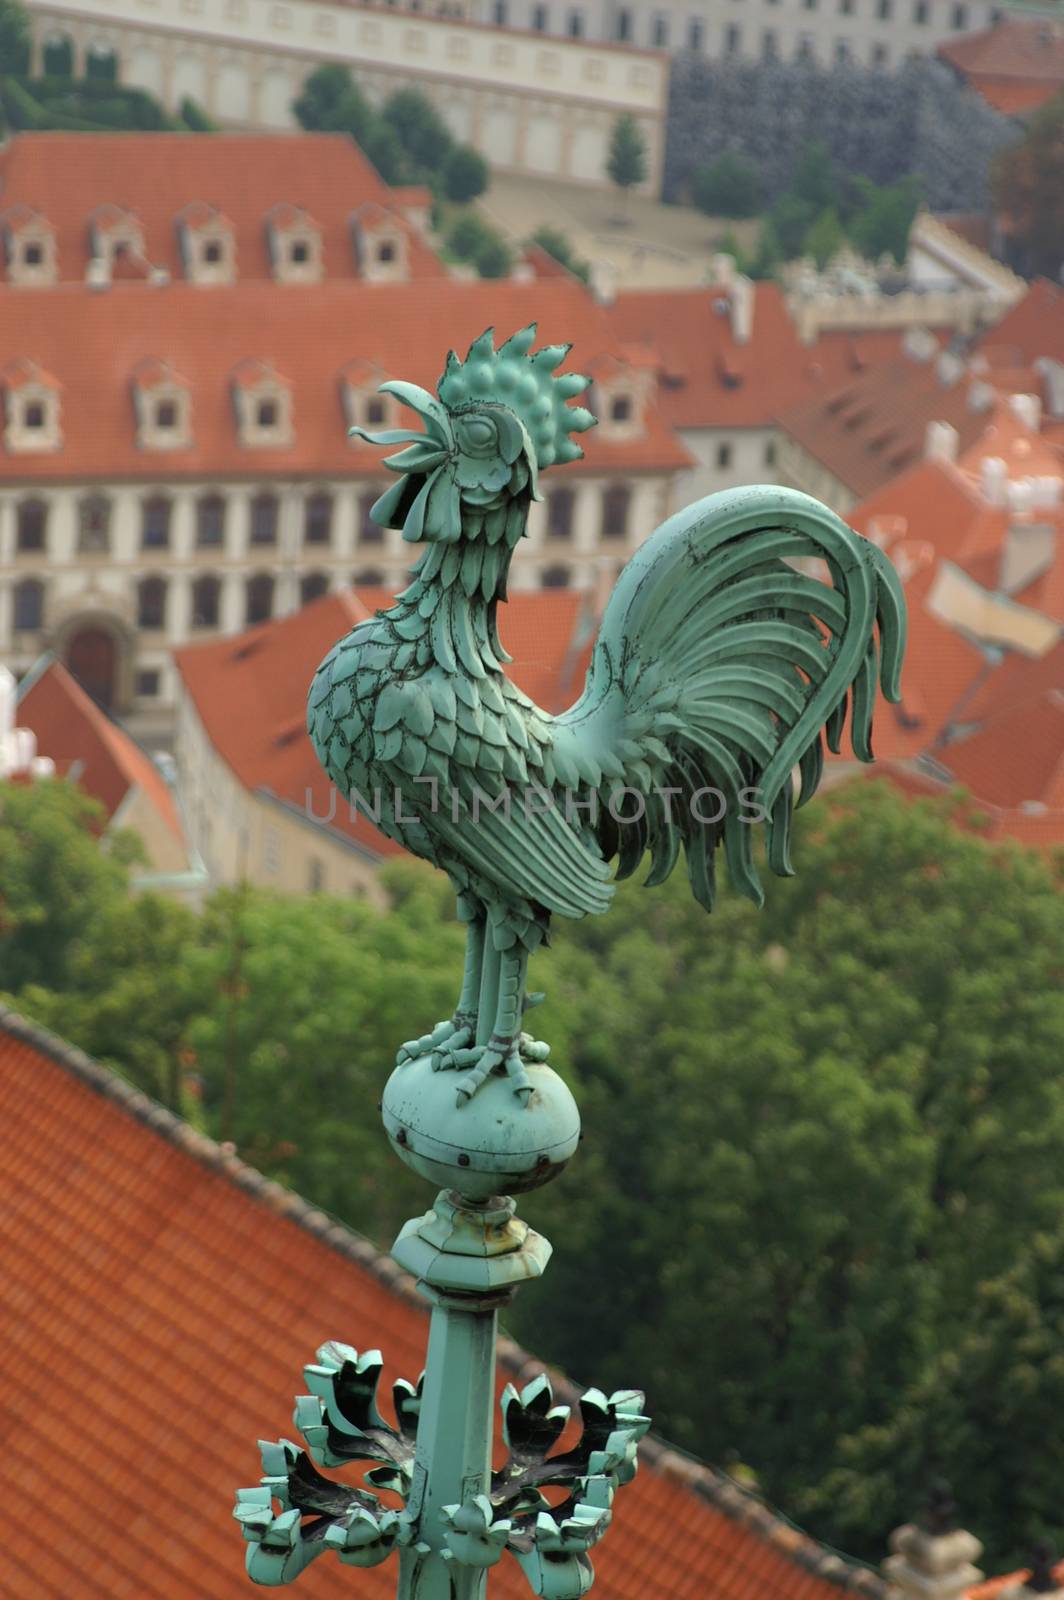 Prague tile roofs and cock on a church tower by javax